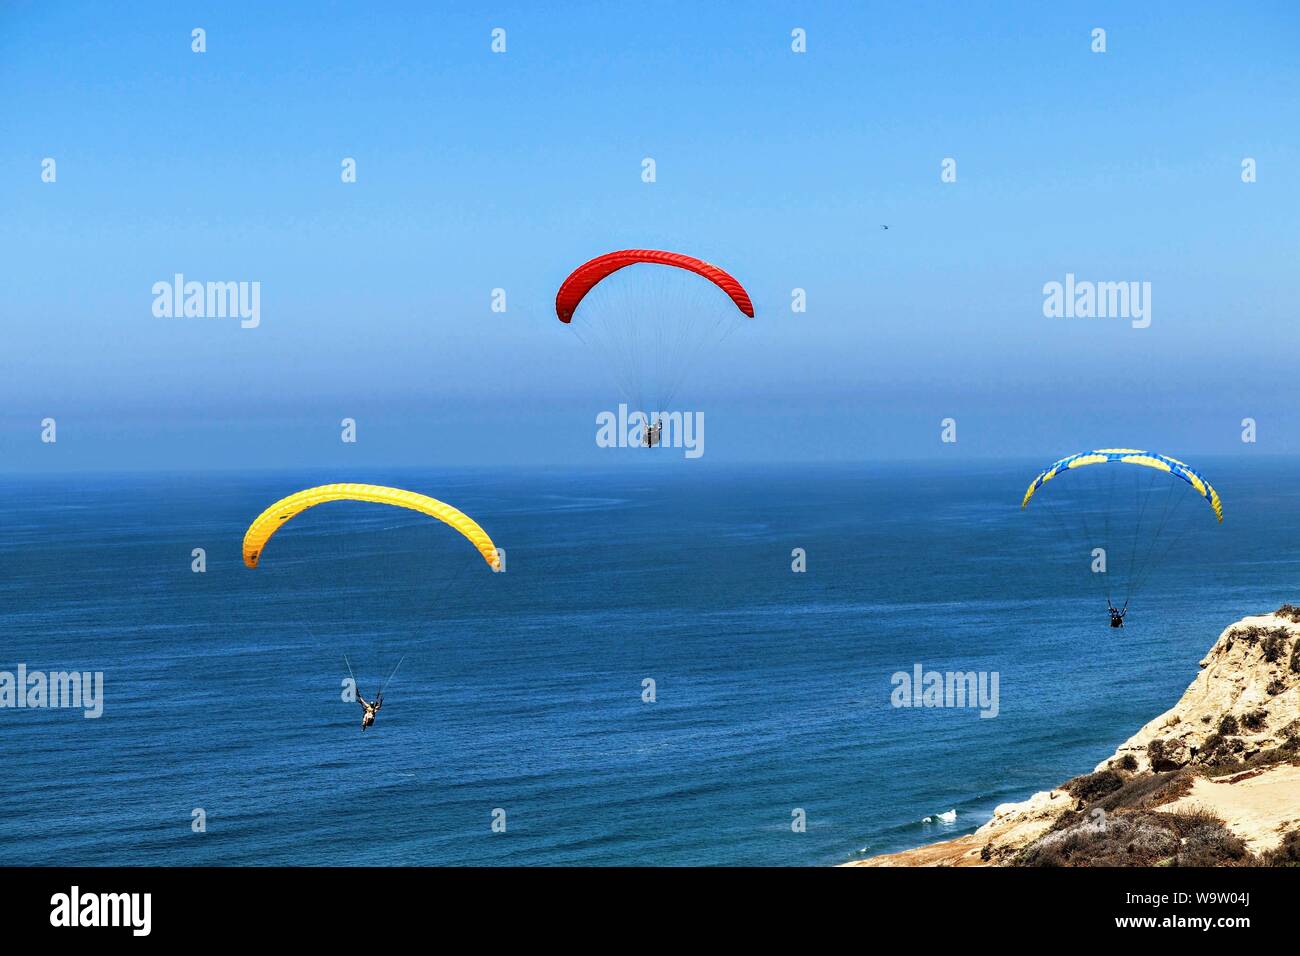 Paragliders at Gliderport August 8, 2019 Stock Photo